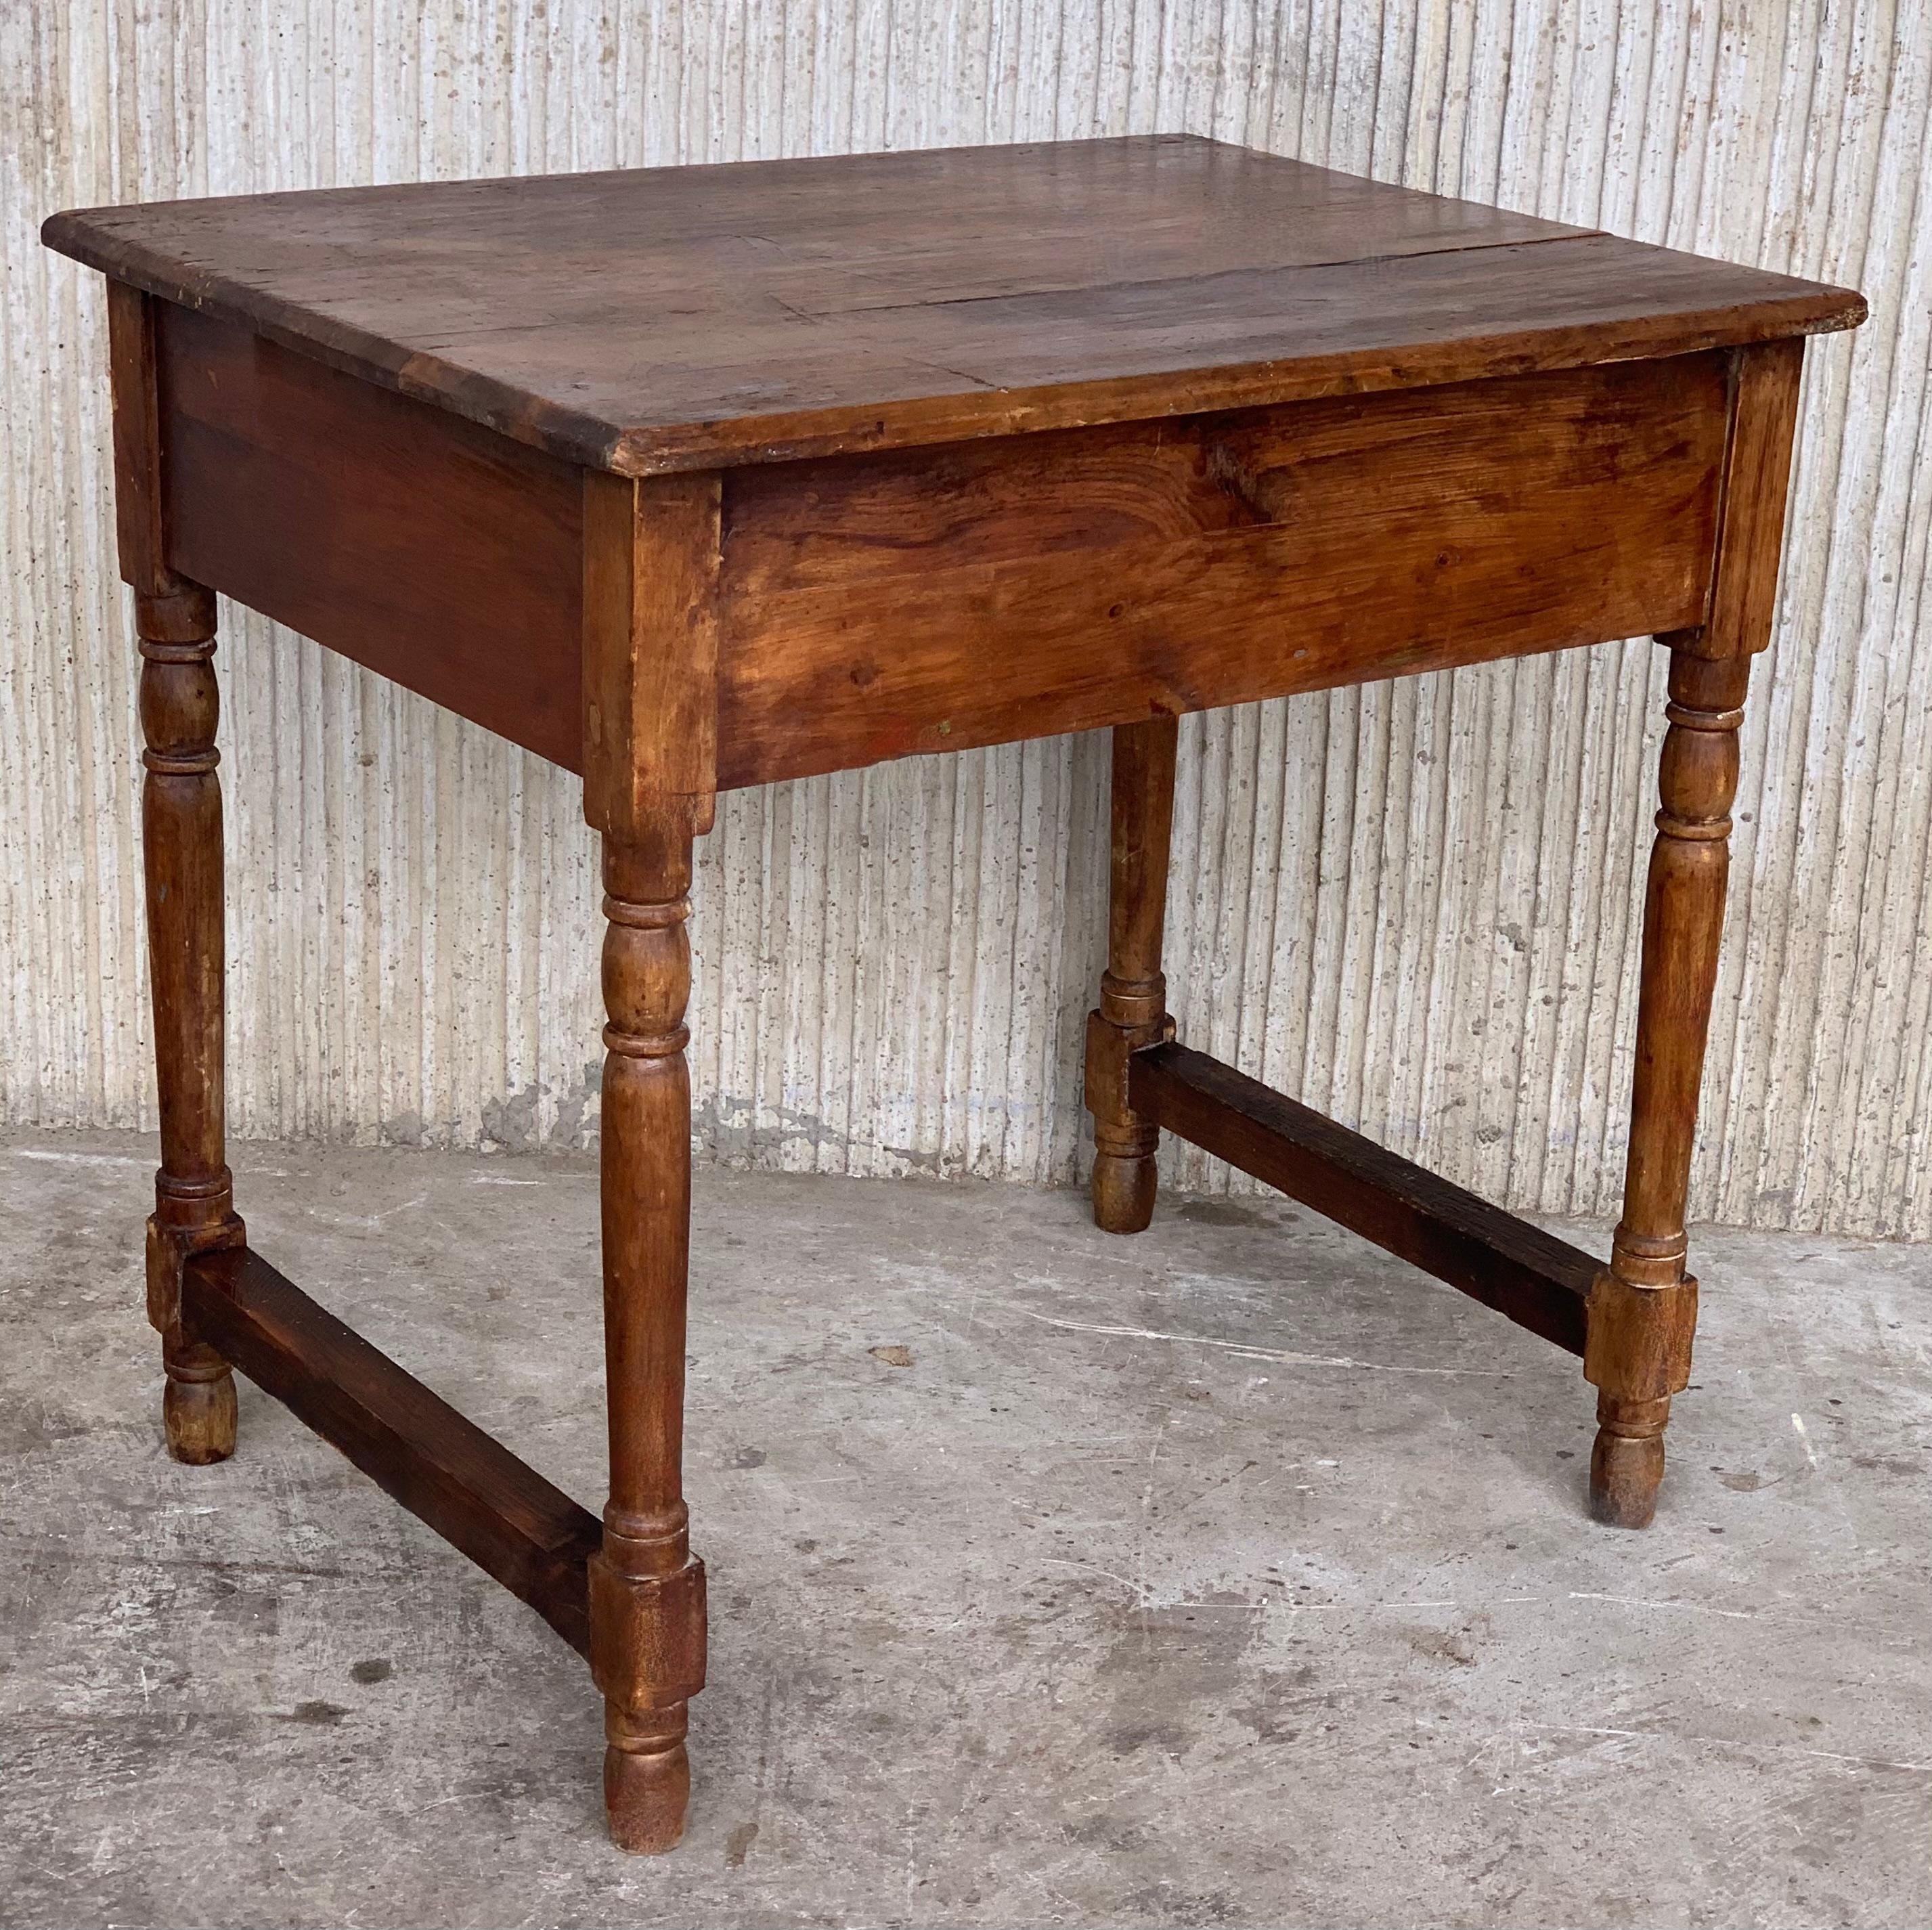 20th Century Country French Style Pine Farmhouse Side, Coffee or Nightstand Table with Drawer